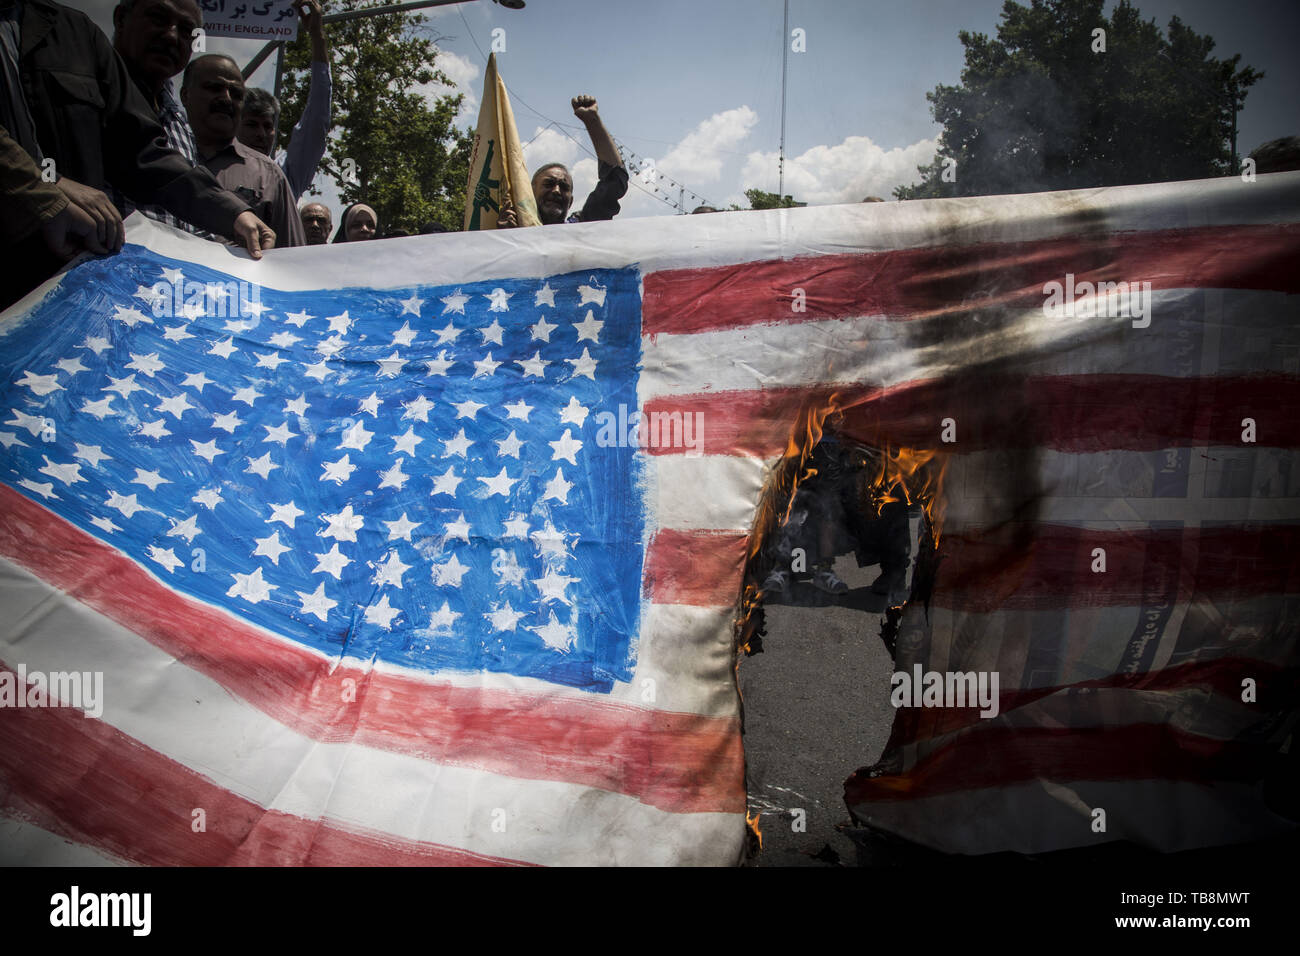 Tehran, Tehran, Iran. 31st May, 2019. Iranians burn US flag, during an anti-Israel rally marking Al Quds Day (Jerusalem Day), in support of Palestinian resistance against Israeli in Tehran, Iran. Each year Iran marks the last Friday of the fasting month of Ramadan as a solidarity day with the Palestinians. Credit: Rouzbeh Fouladi/ZUMA Wire/Alamy Live News Stock Photo